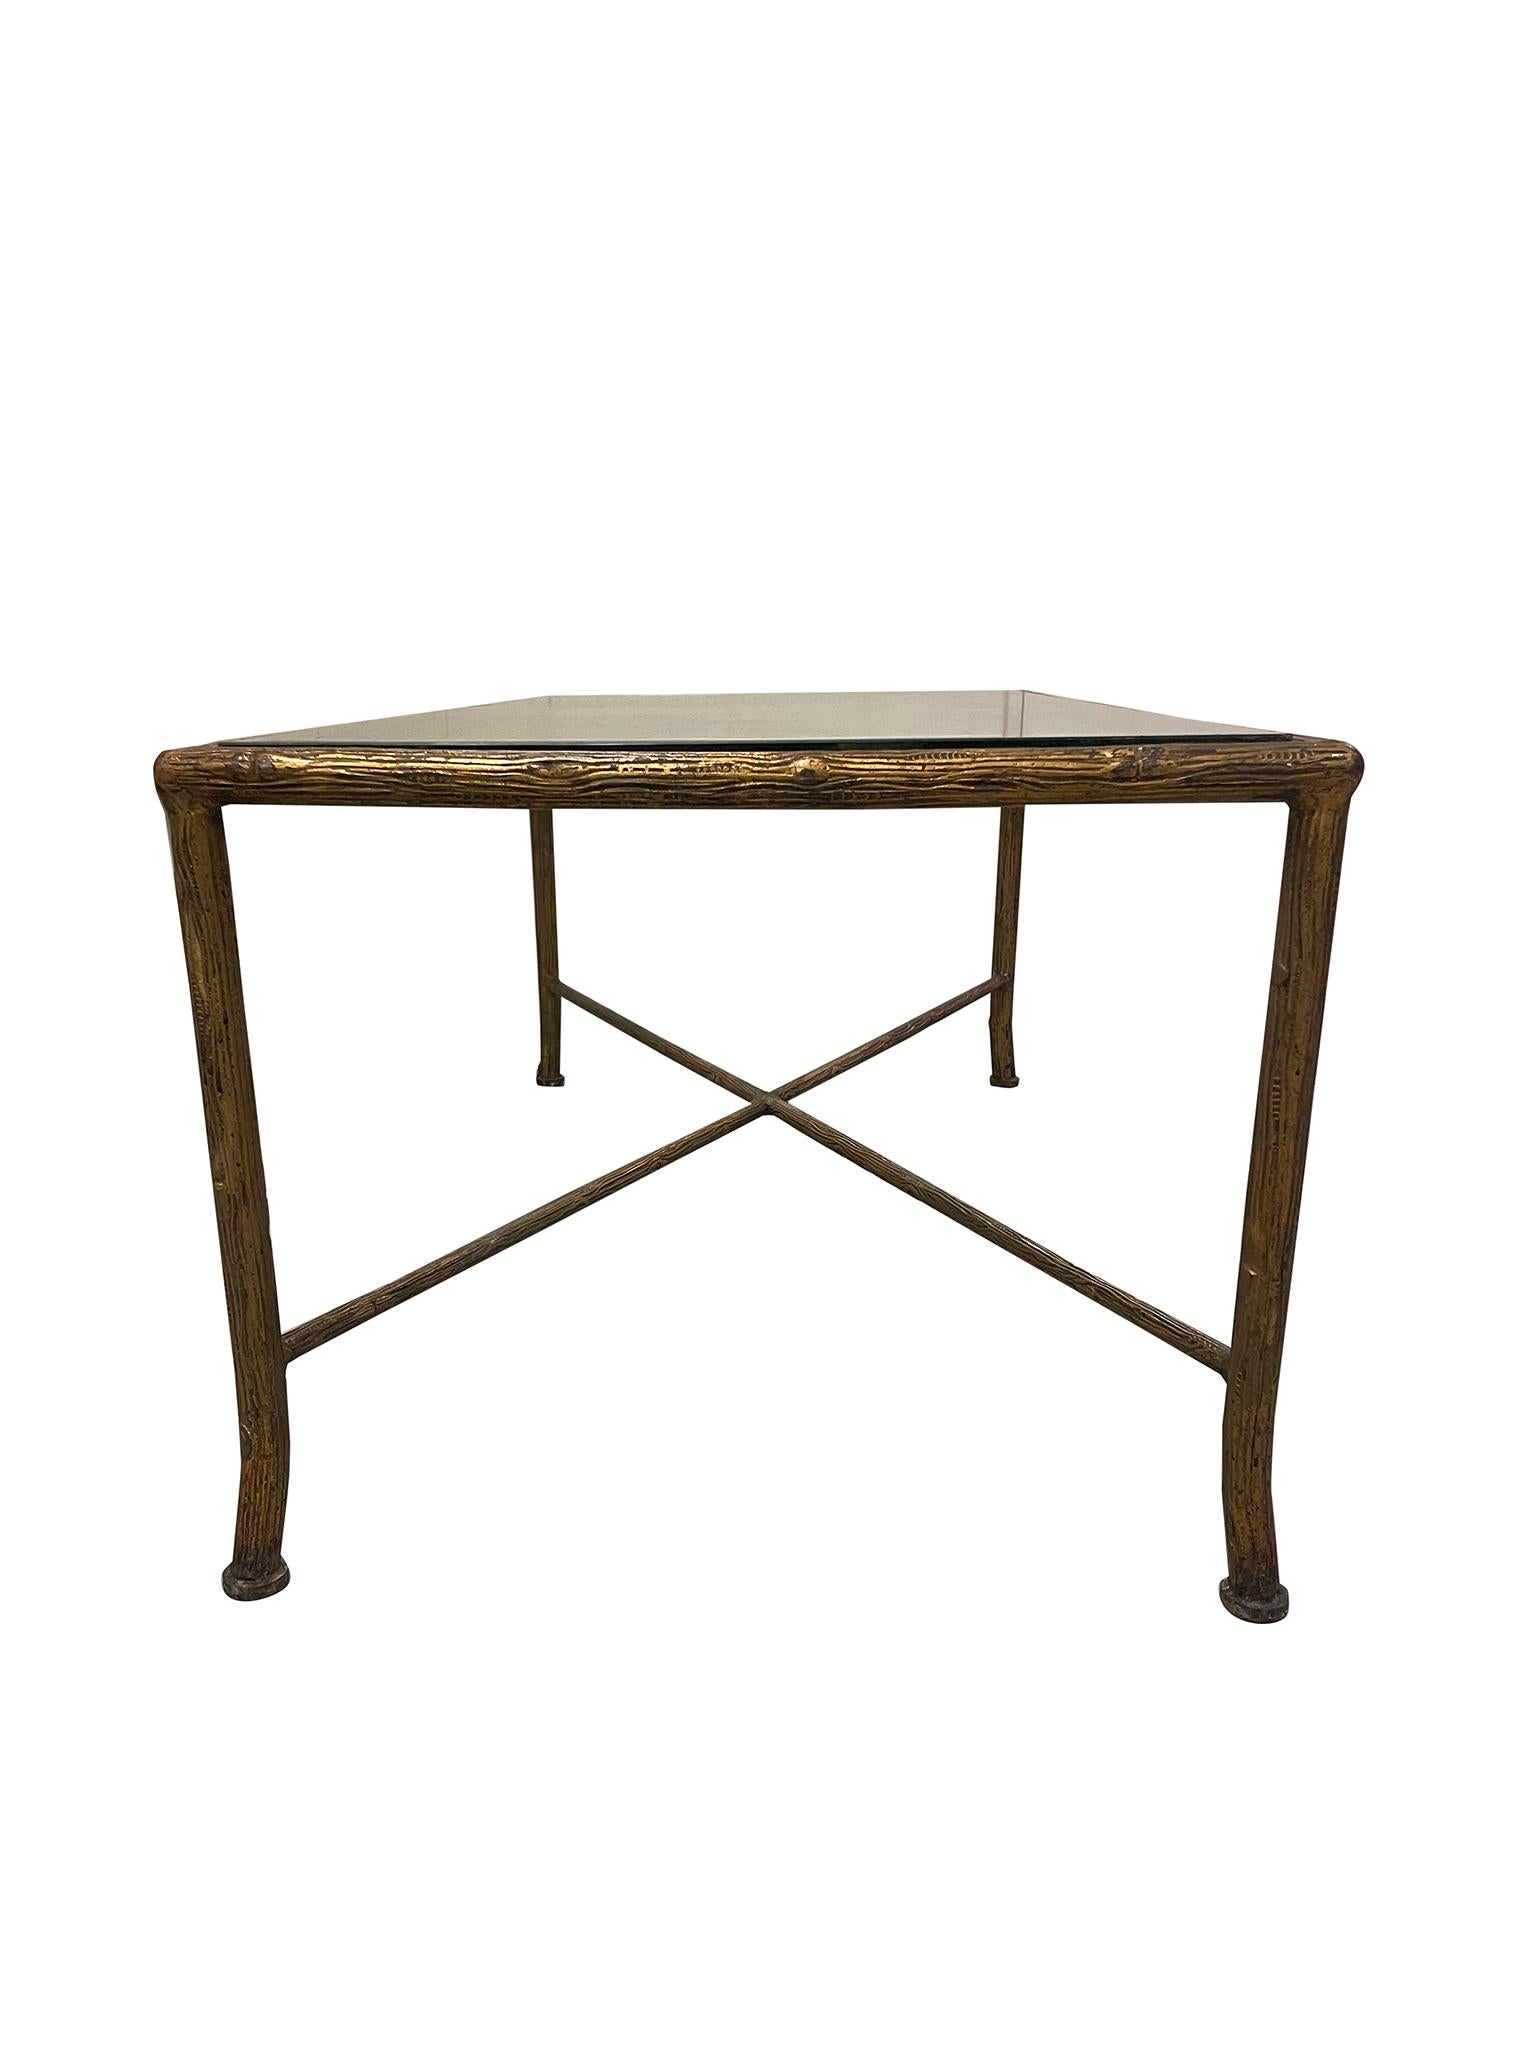 Art Deco Vintage Glass and Gilt Metal Coffee Table Attributed to Maison Jansen For Sale